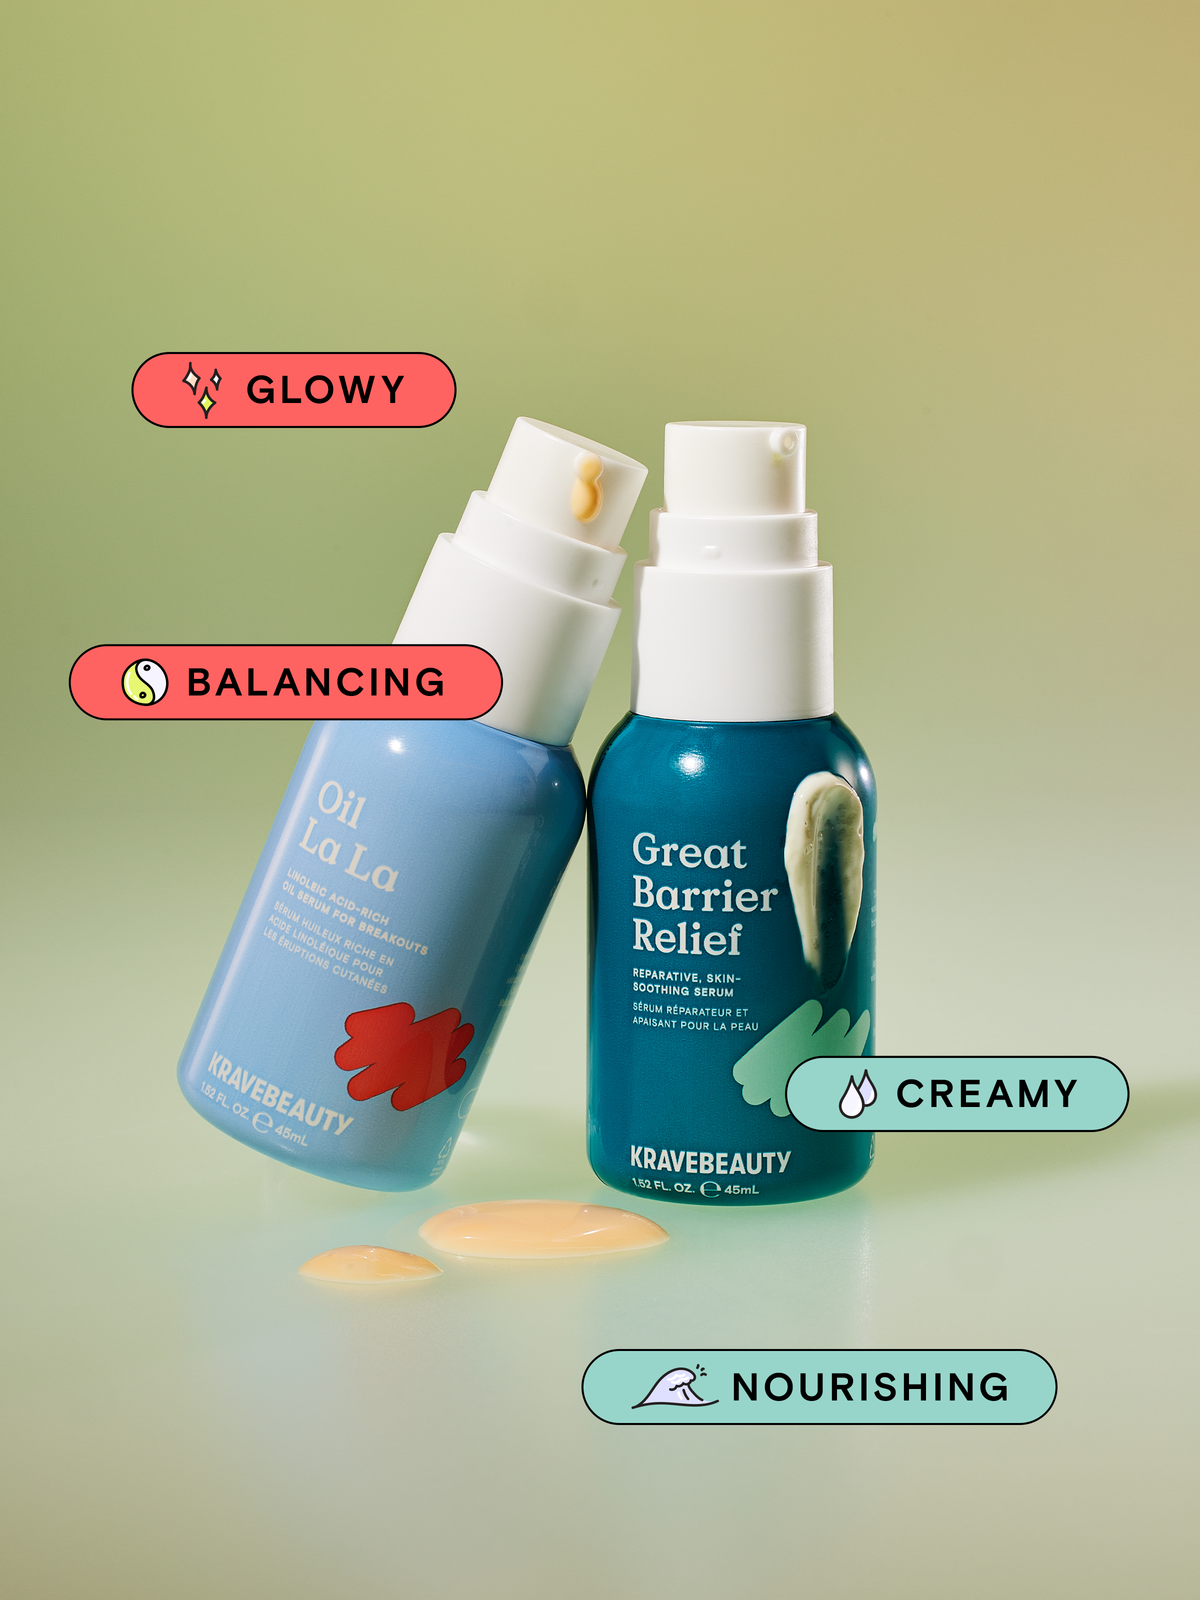 Oil La La is glowy and balancing while Great Barrier Relief is creamy and nourishing!